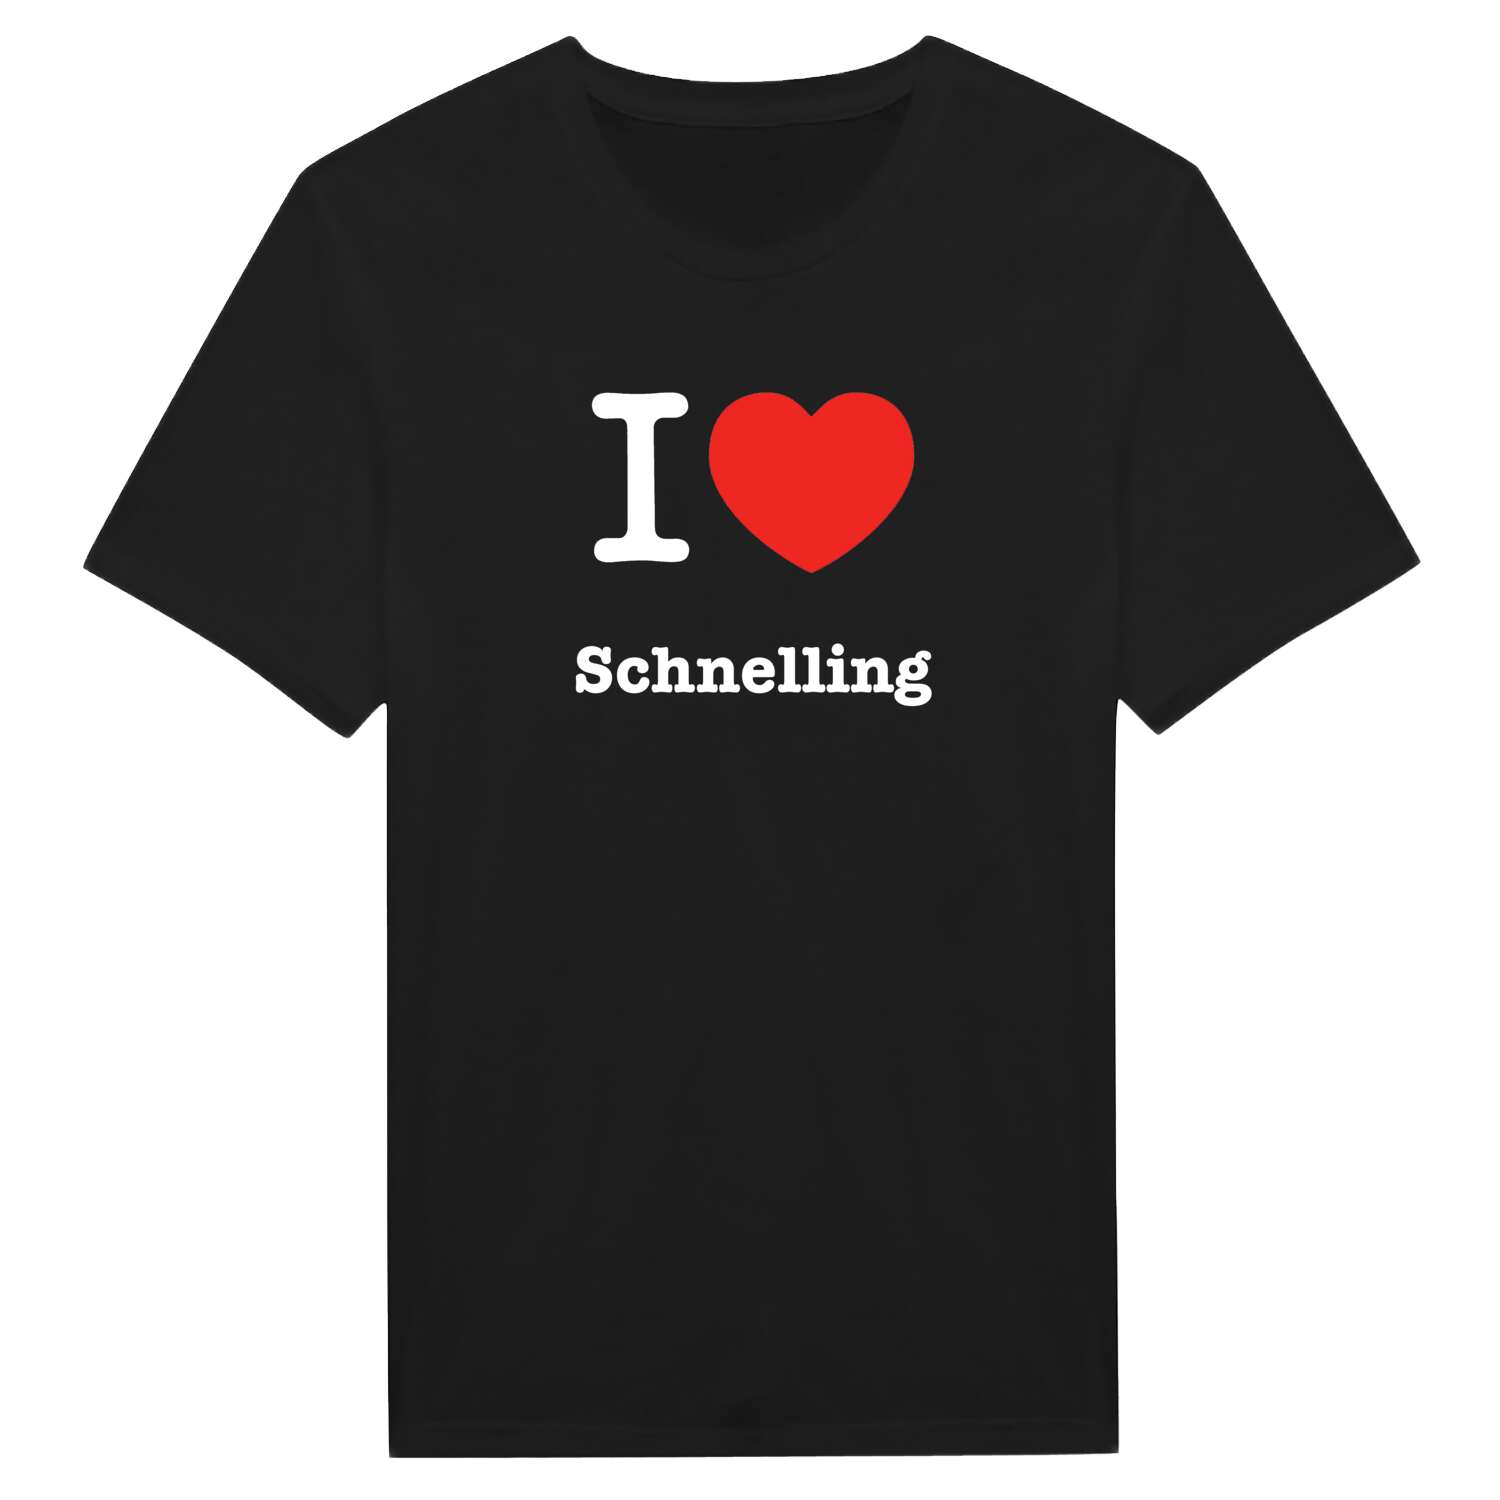 Schnelling T-Shirt »I love«